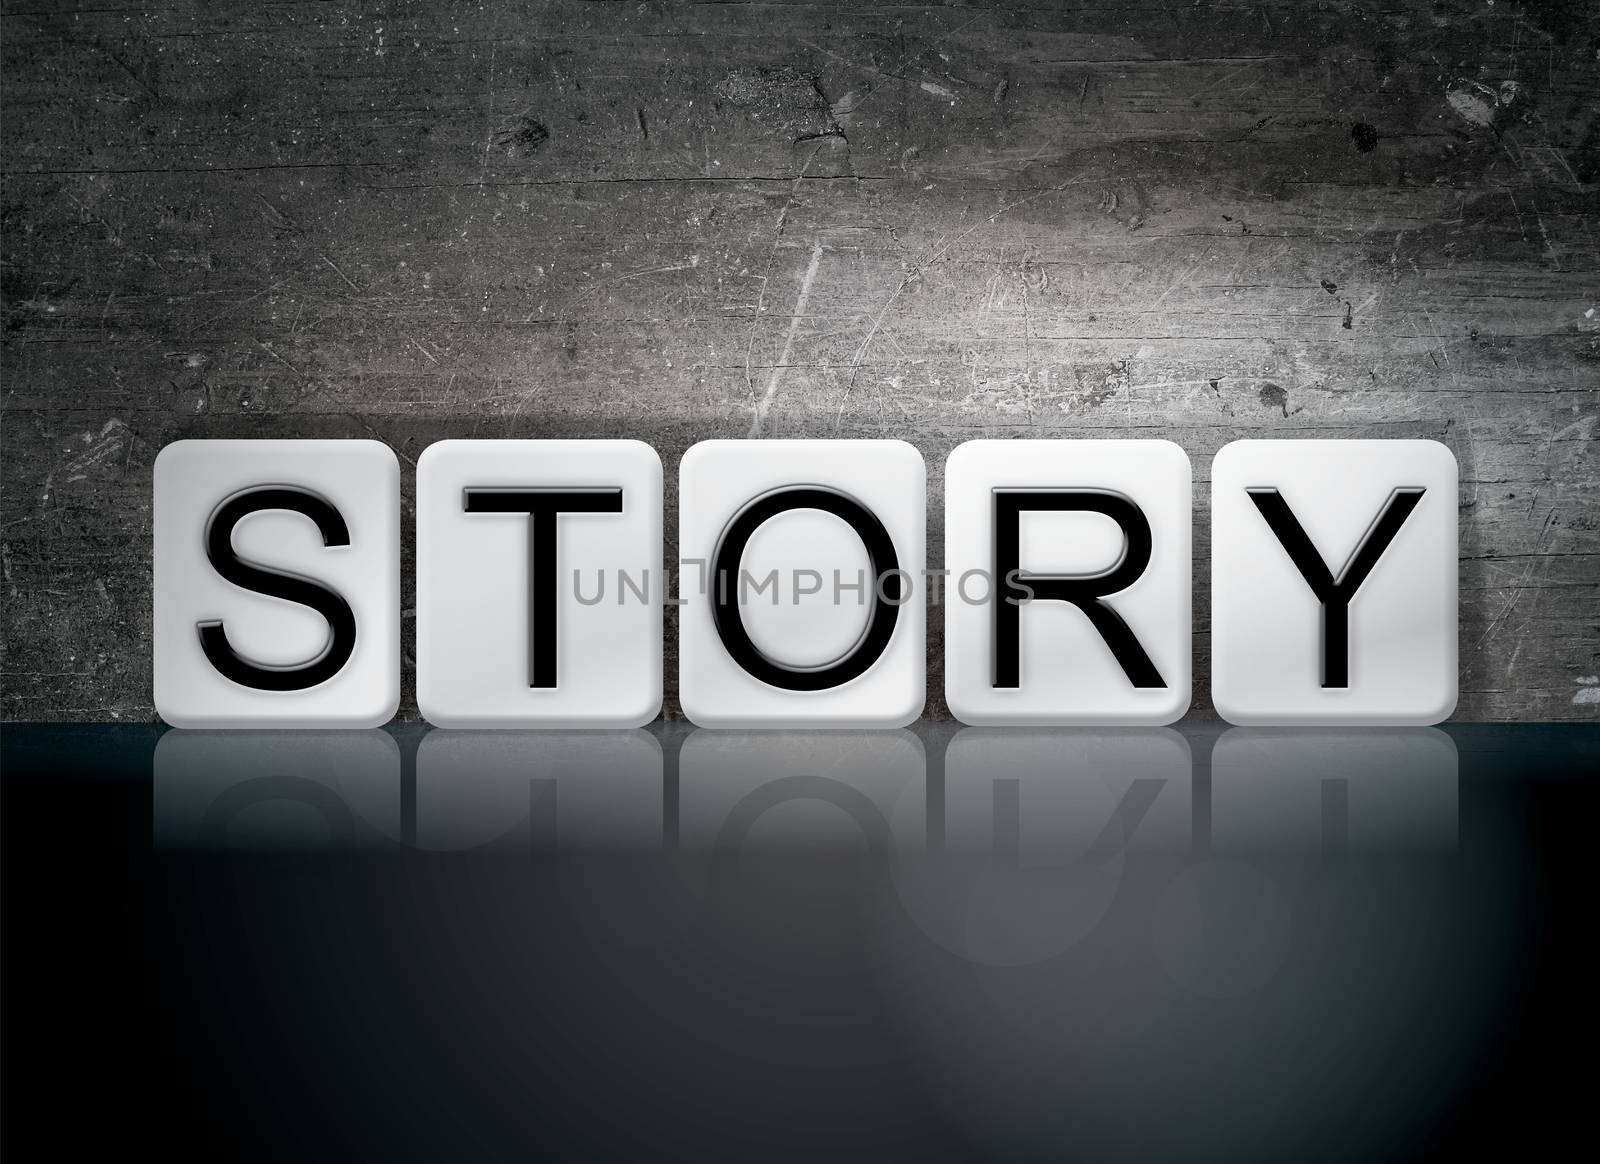 The word "Story" written in white tiles against a dark vintage grunge background.